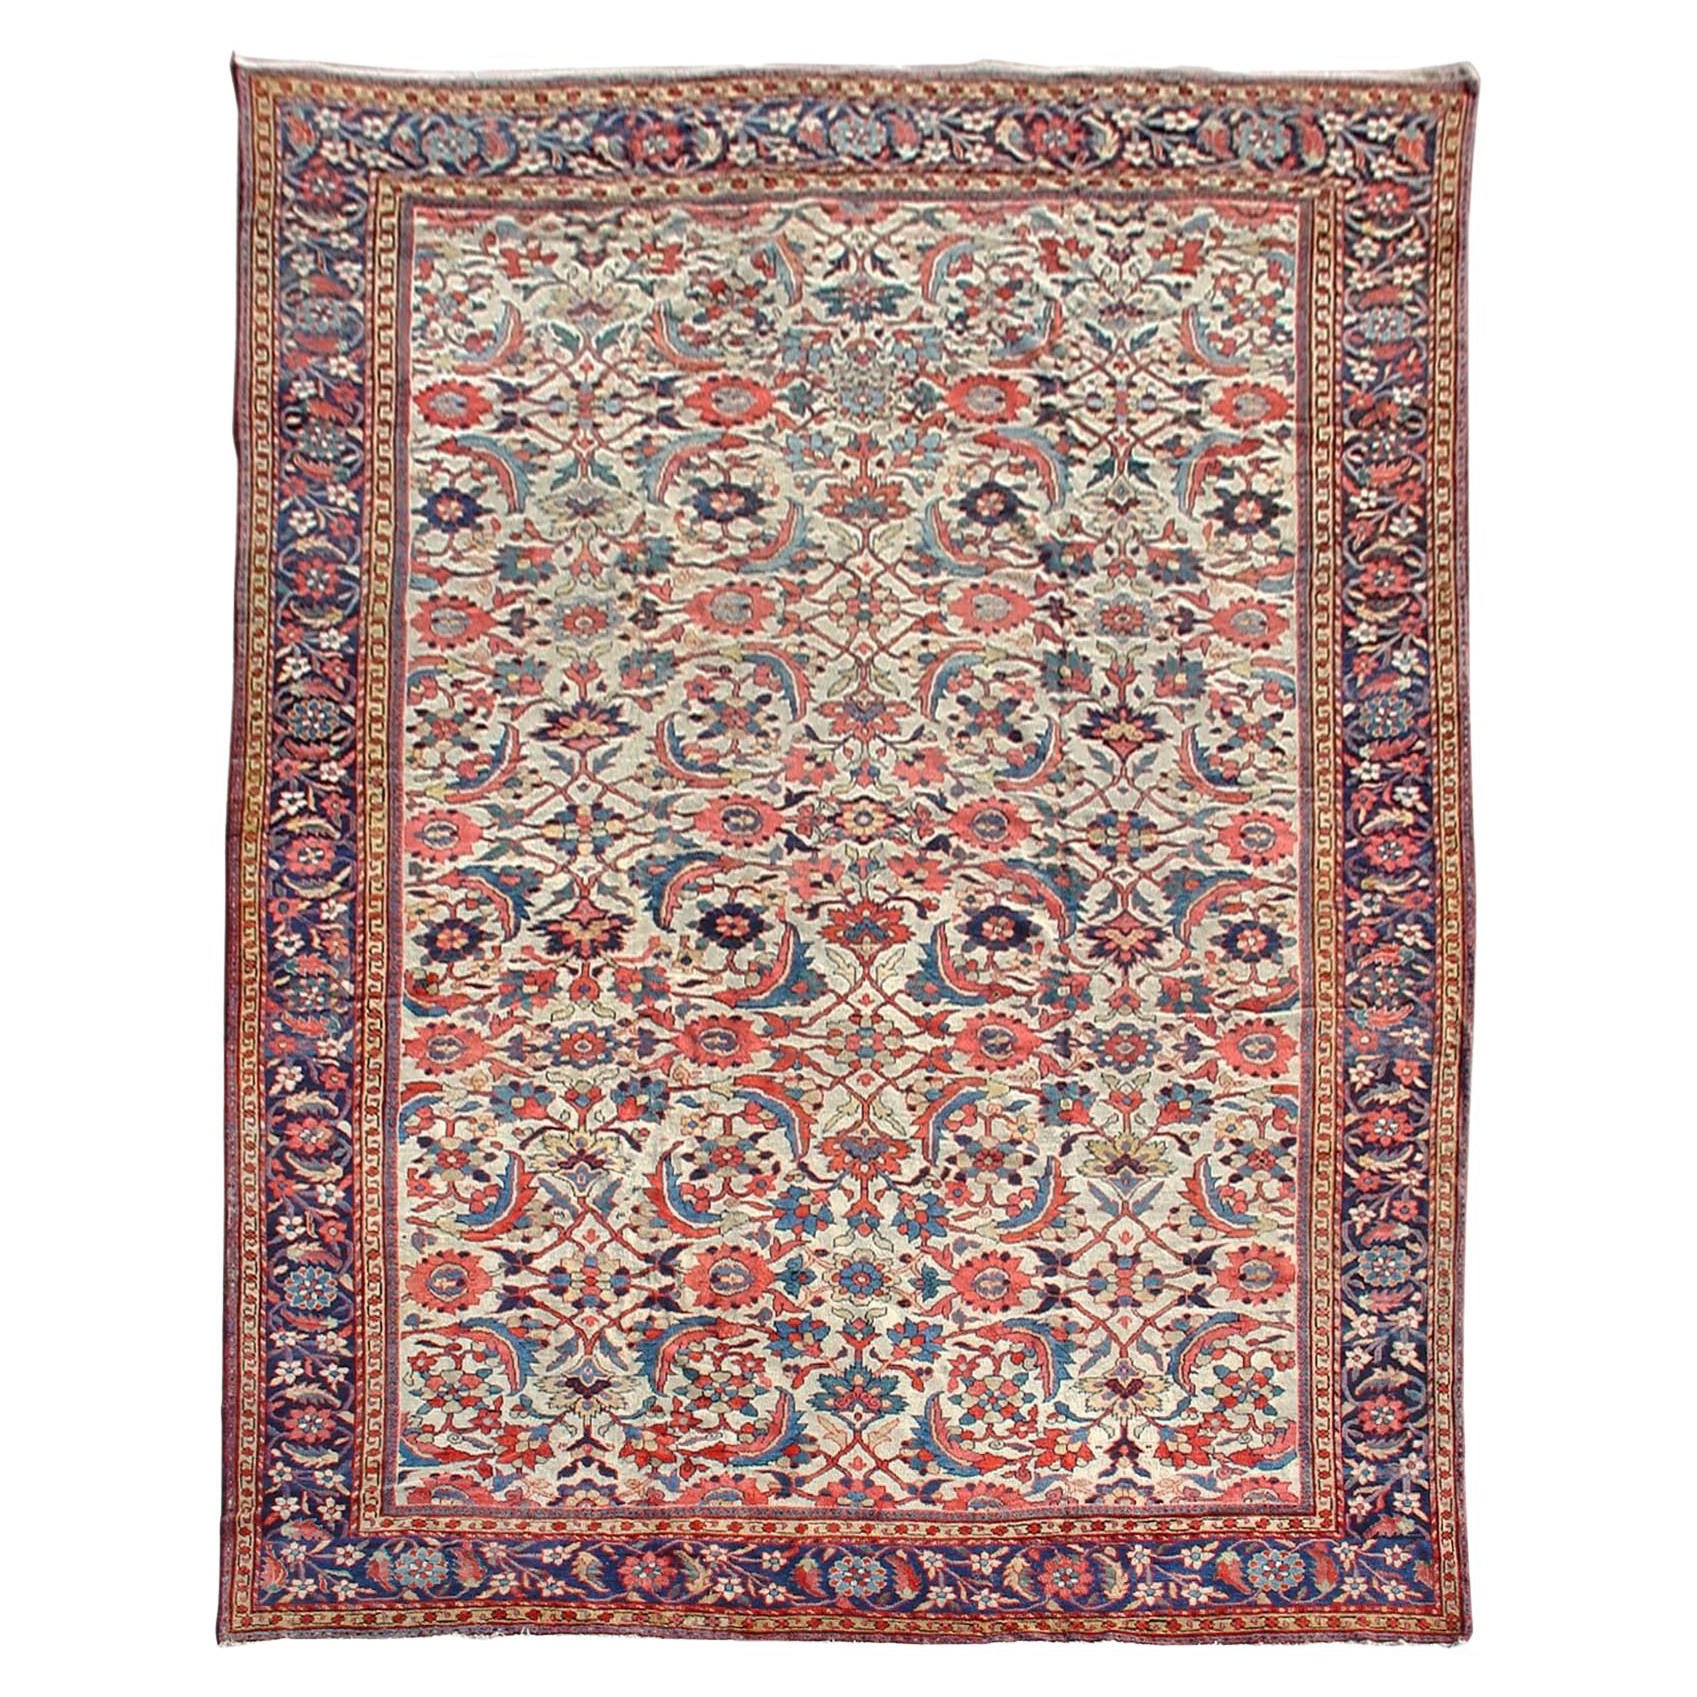 Large Antique Persian Fereghan Carpet, Late 19th Century